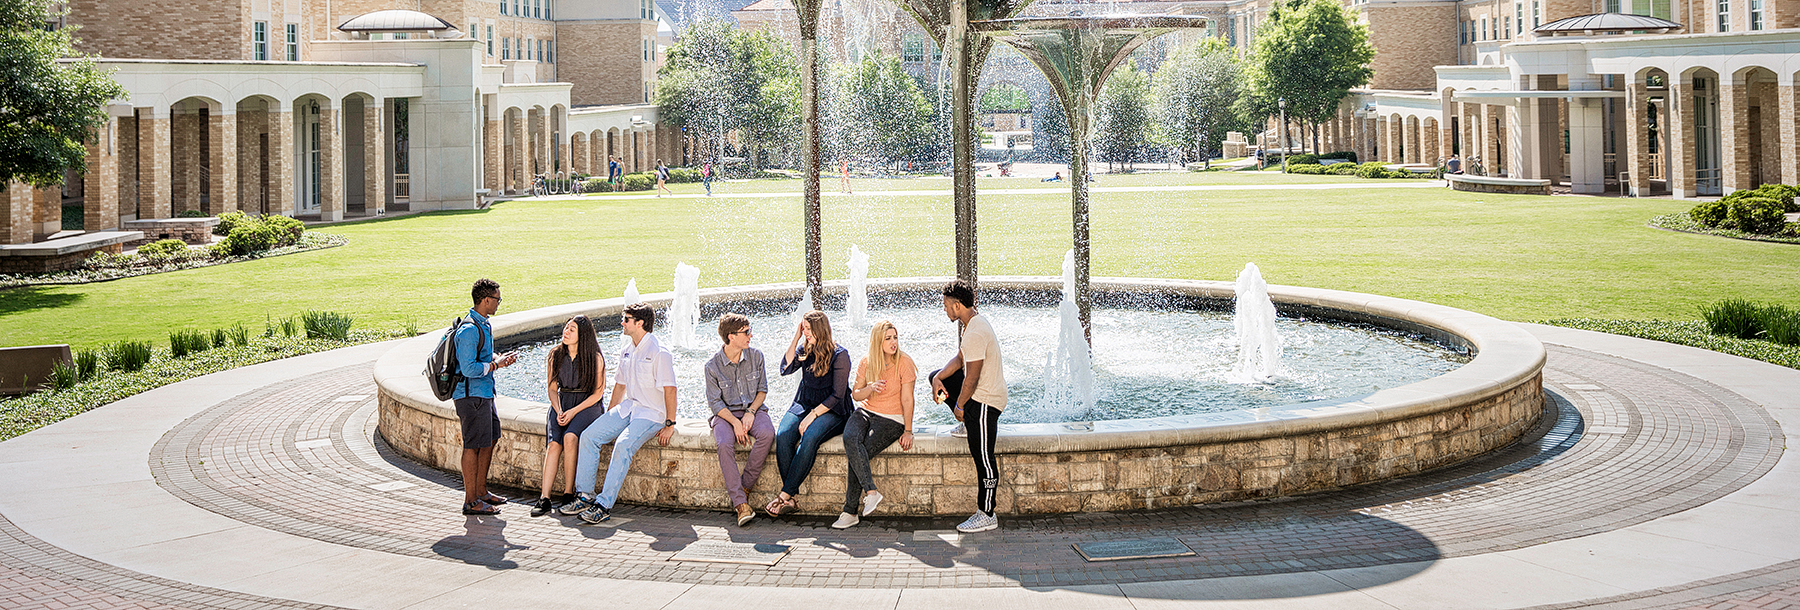 Section Image: Students at Frog Fountain in the center of campus. 